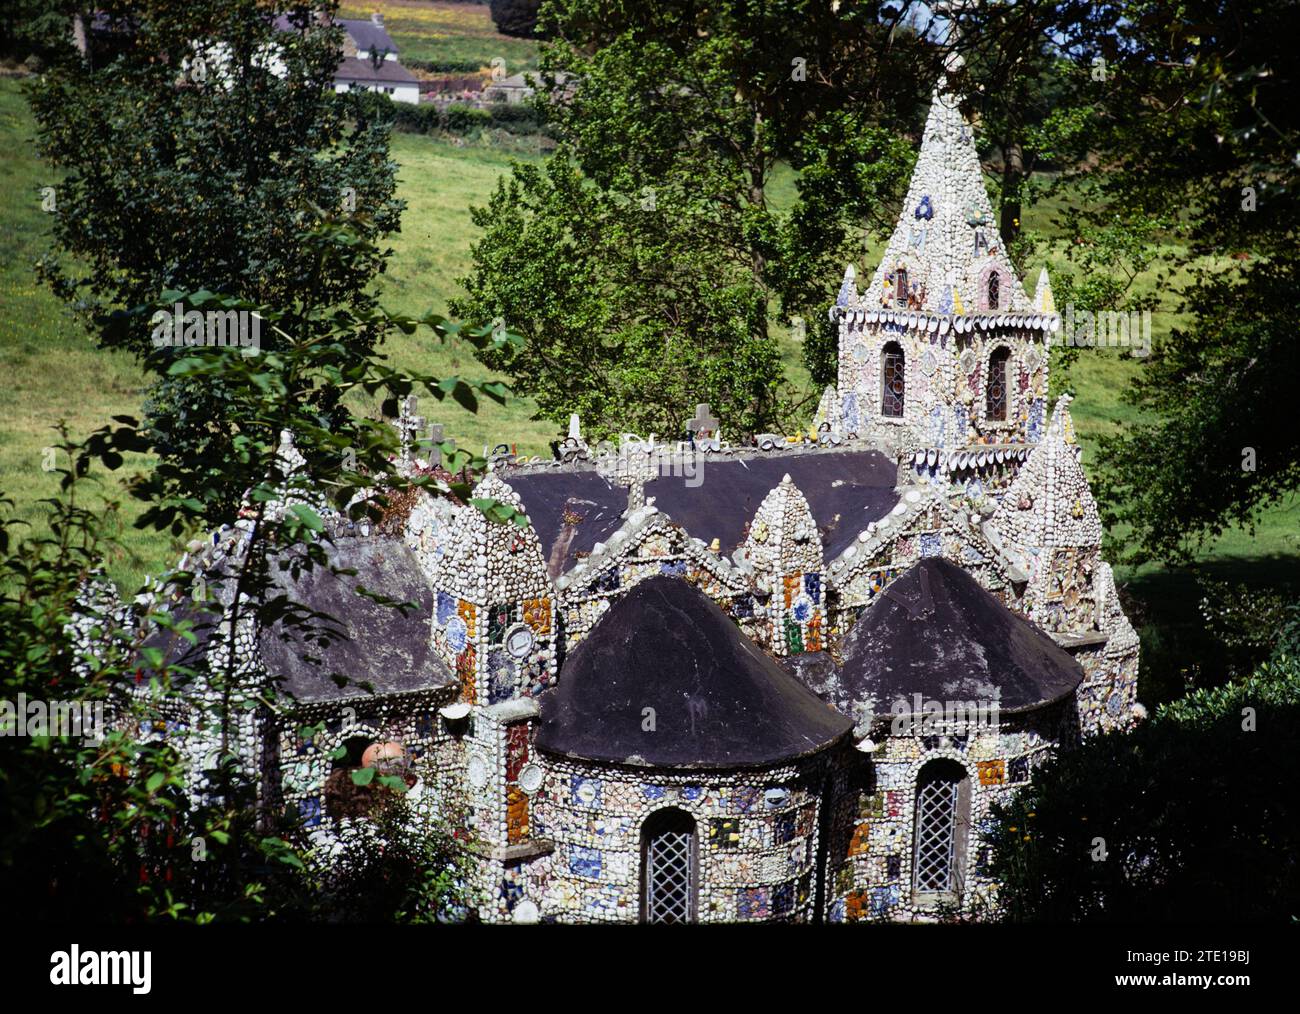 Little Chapel at Les Vauxbelets, Guernsey, Channel Island, Great Britain, June 1974 Stock Photo